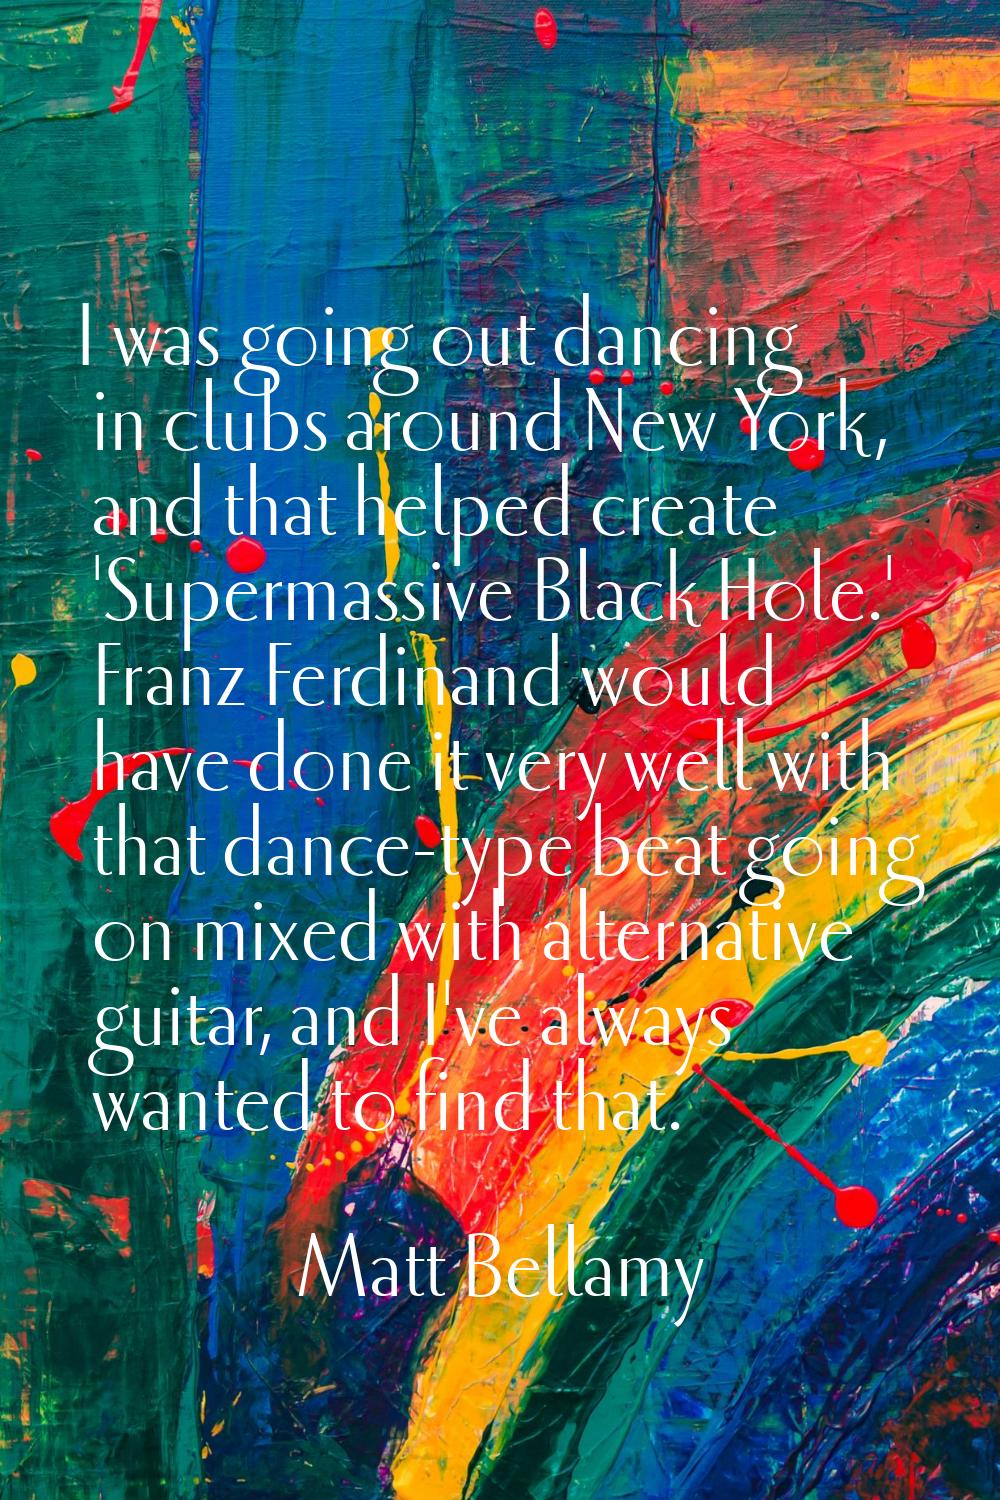 I was going out dancing in clubs around New York, and that helped create 'Supermassive Black Hole.'